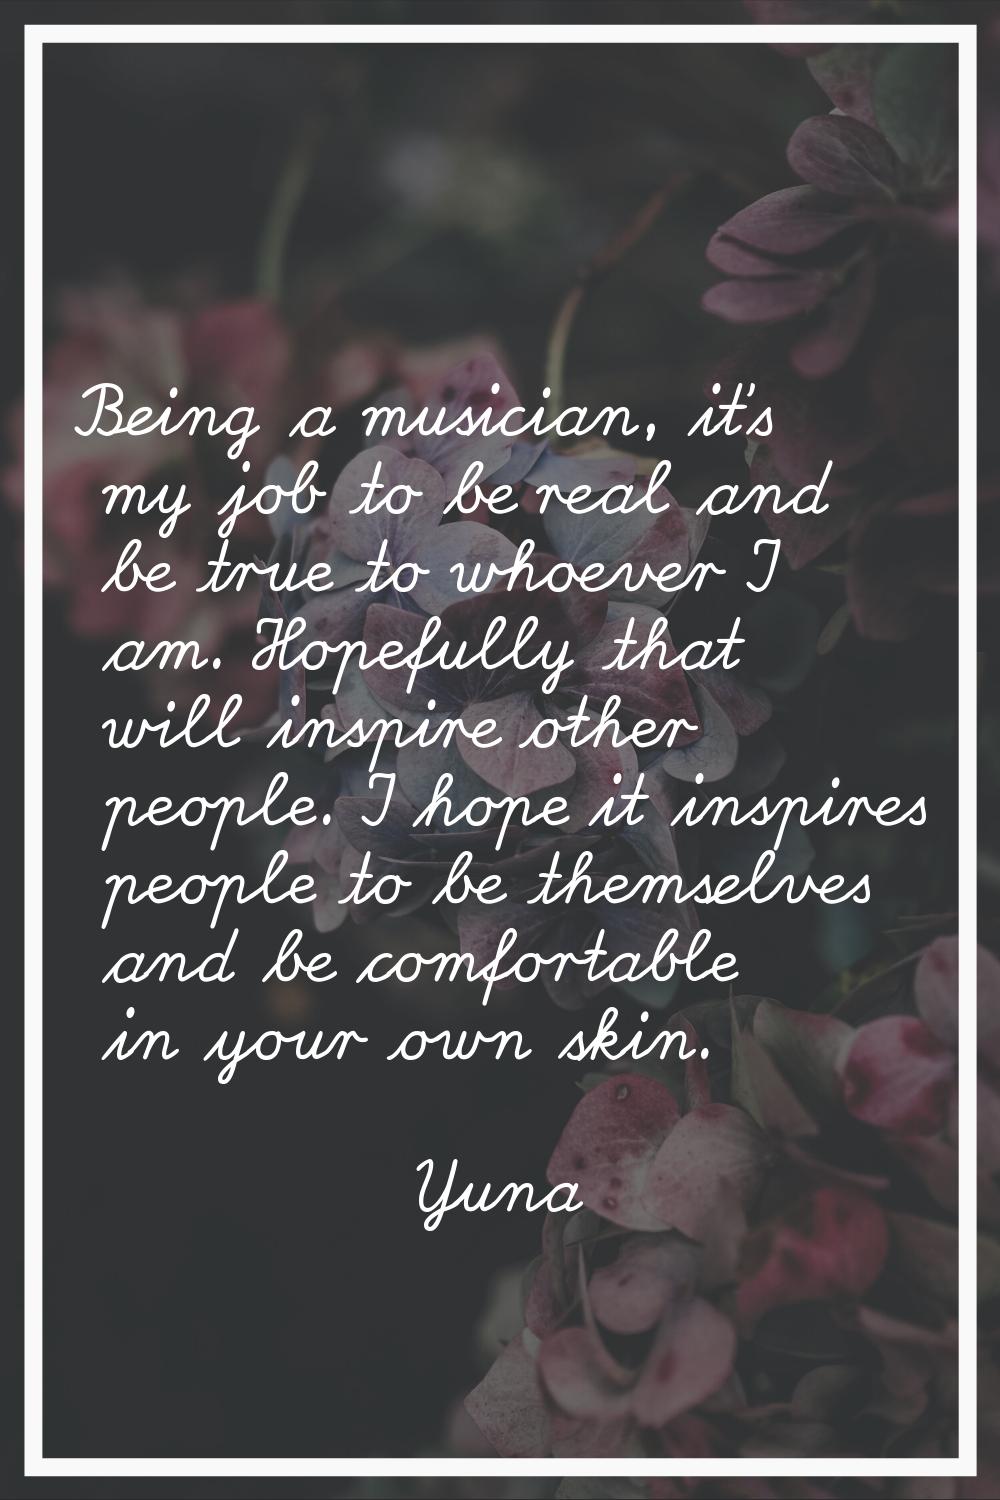 Being a musician, it's my job to be real and be true to whoever I am. Hopefully that will inspire o